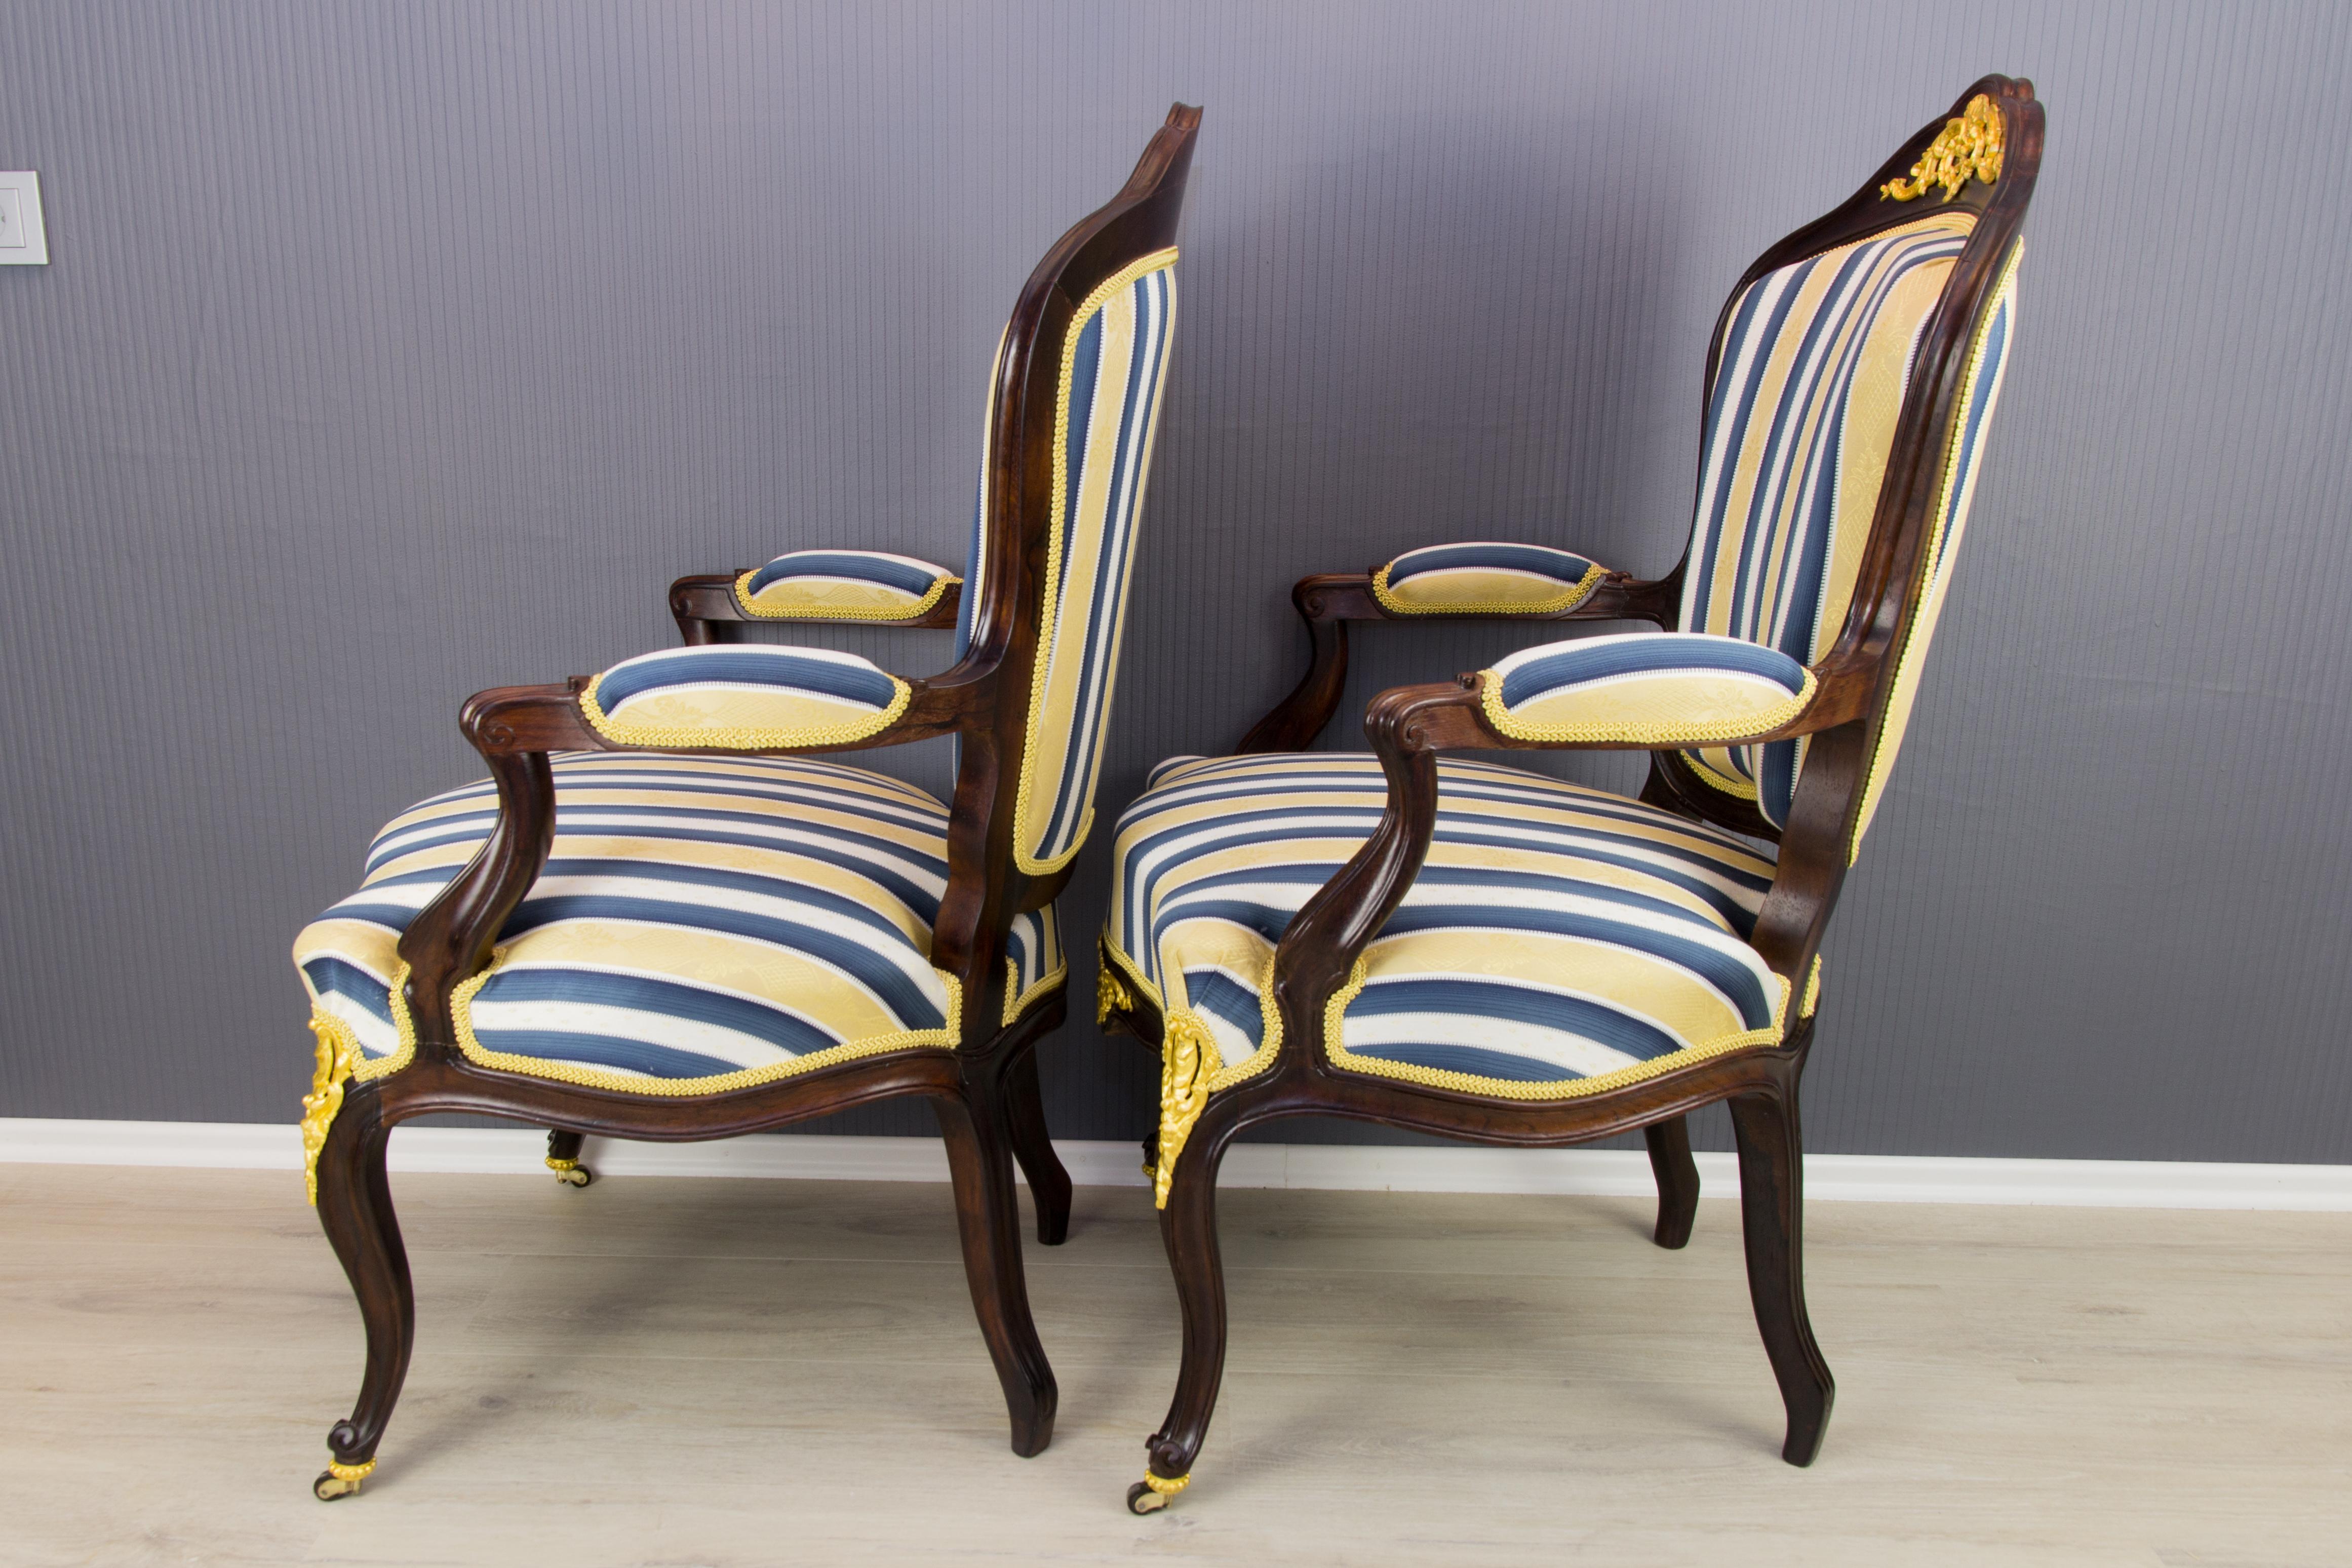 Pair of 19th Century Louis XV Style Walnut Armchairs in Golden, Blue, and White  For Sale 13